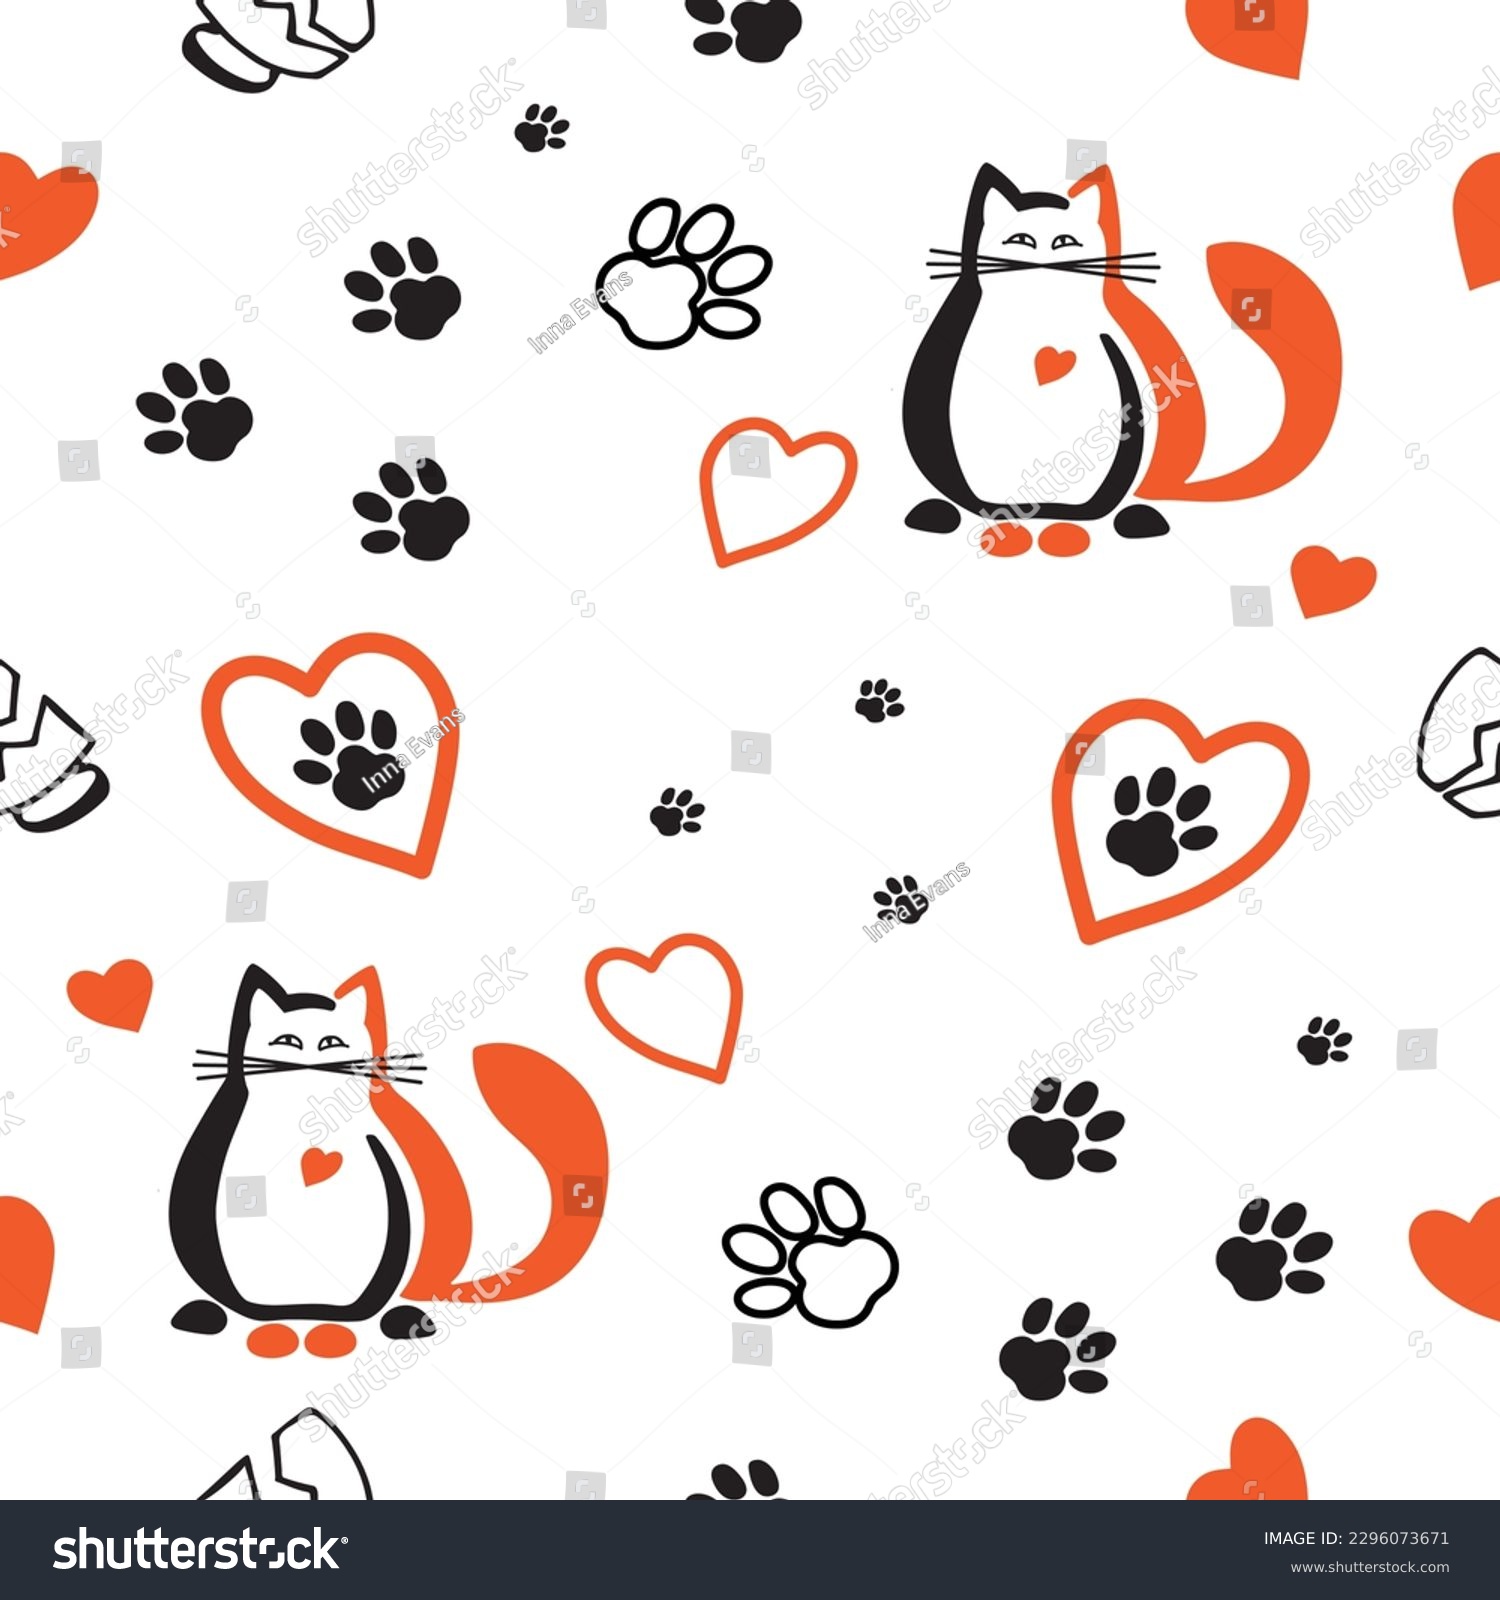 SVG of Funny cute flat art seamless cartoon pattern with black and ginger cats, hearts, cat paw prints and broken mugs in contrast bright red and black colors in white background svg